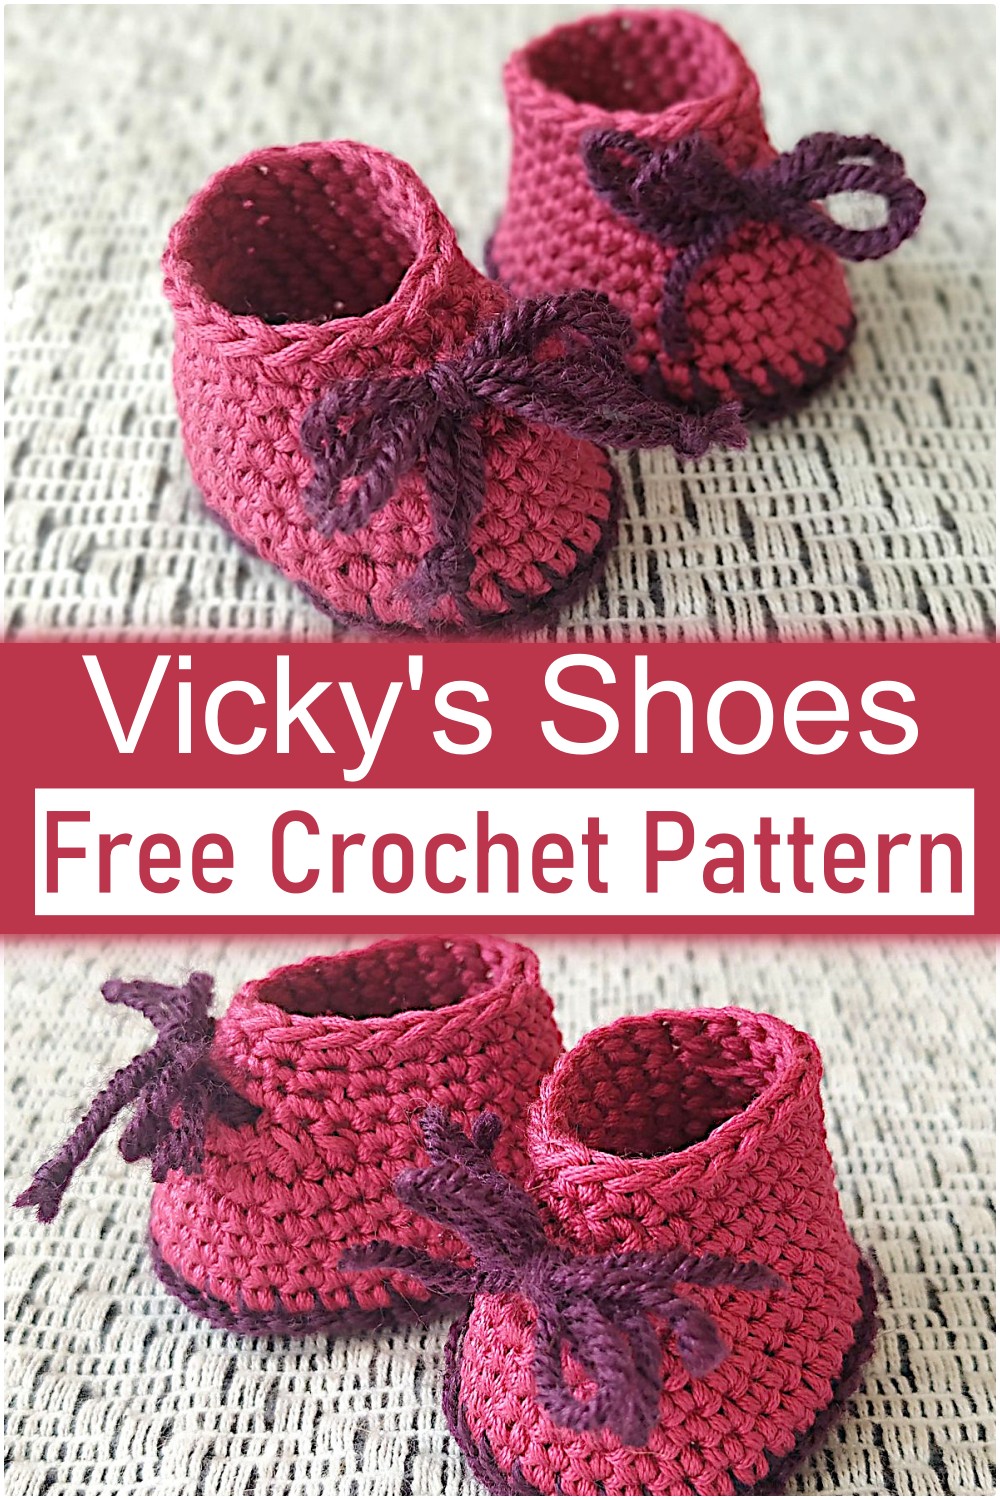 How To Make Crochet Shoes With Soles